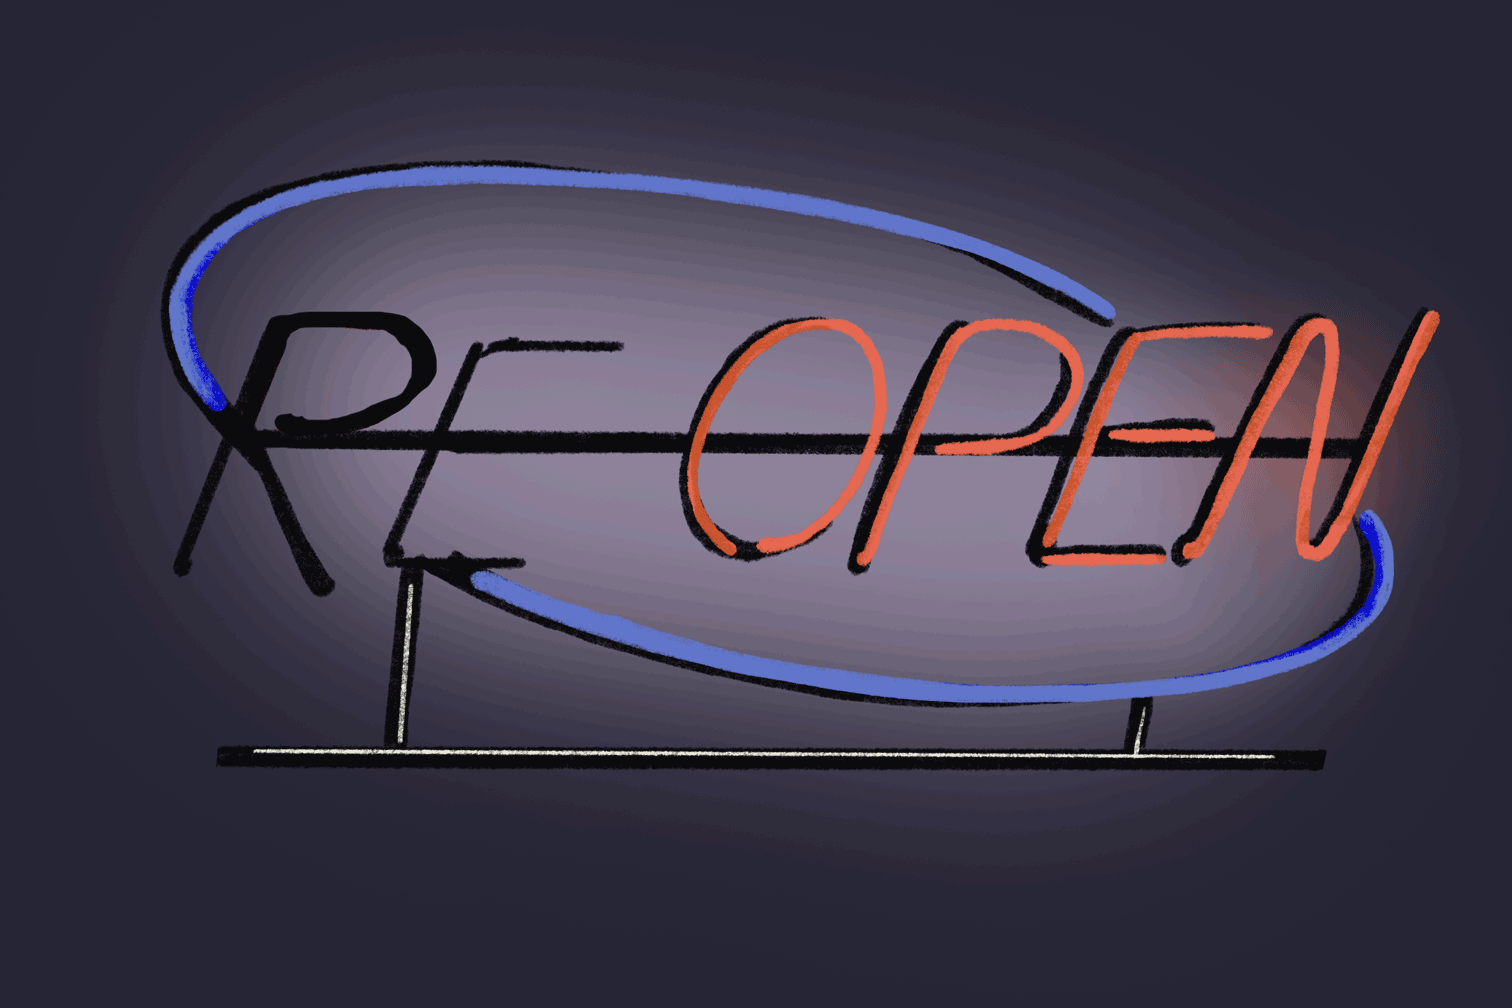 Animated illustration of a neon sign that says "RE-OPEN" where the "RE" is flickering.